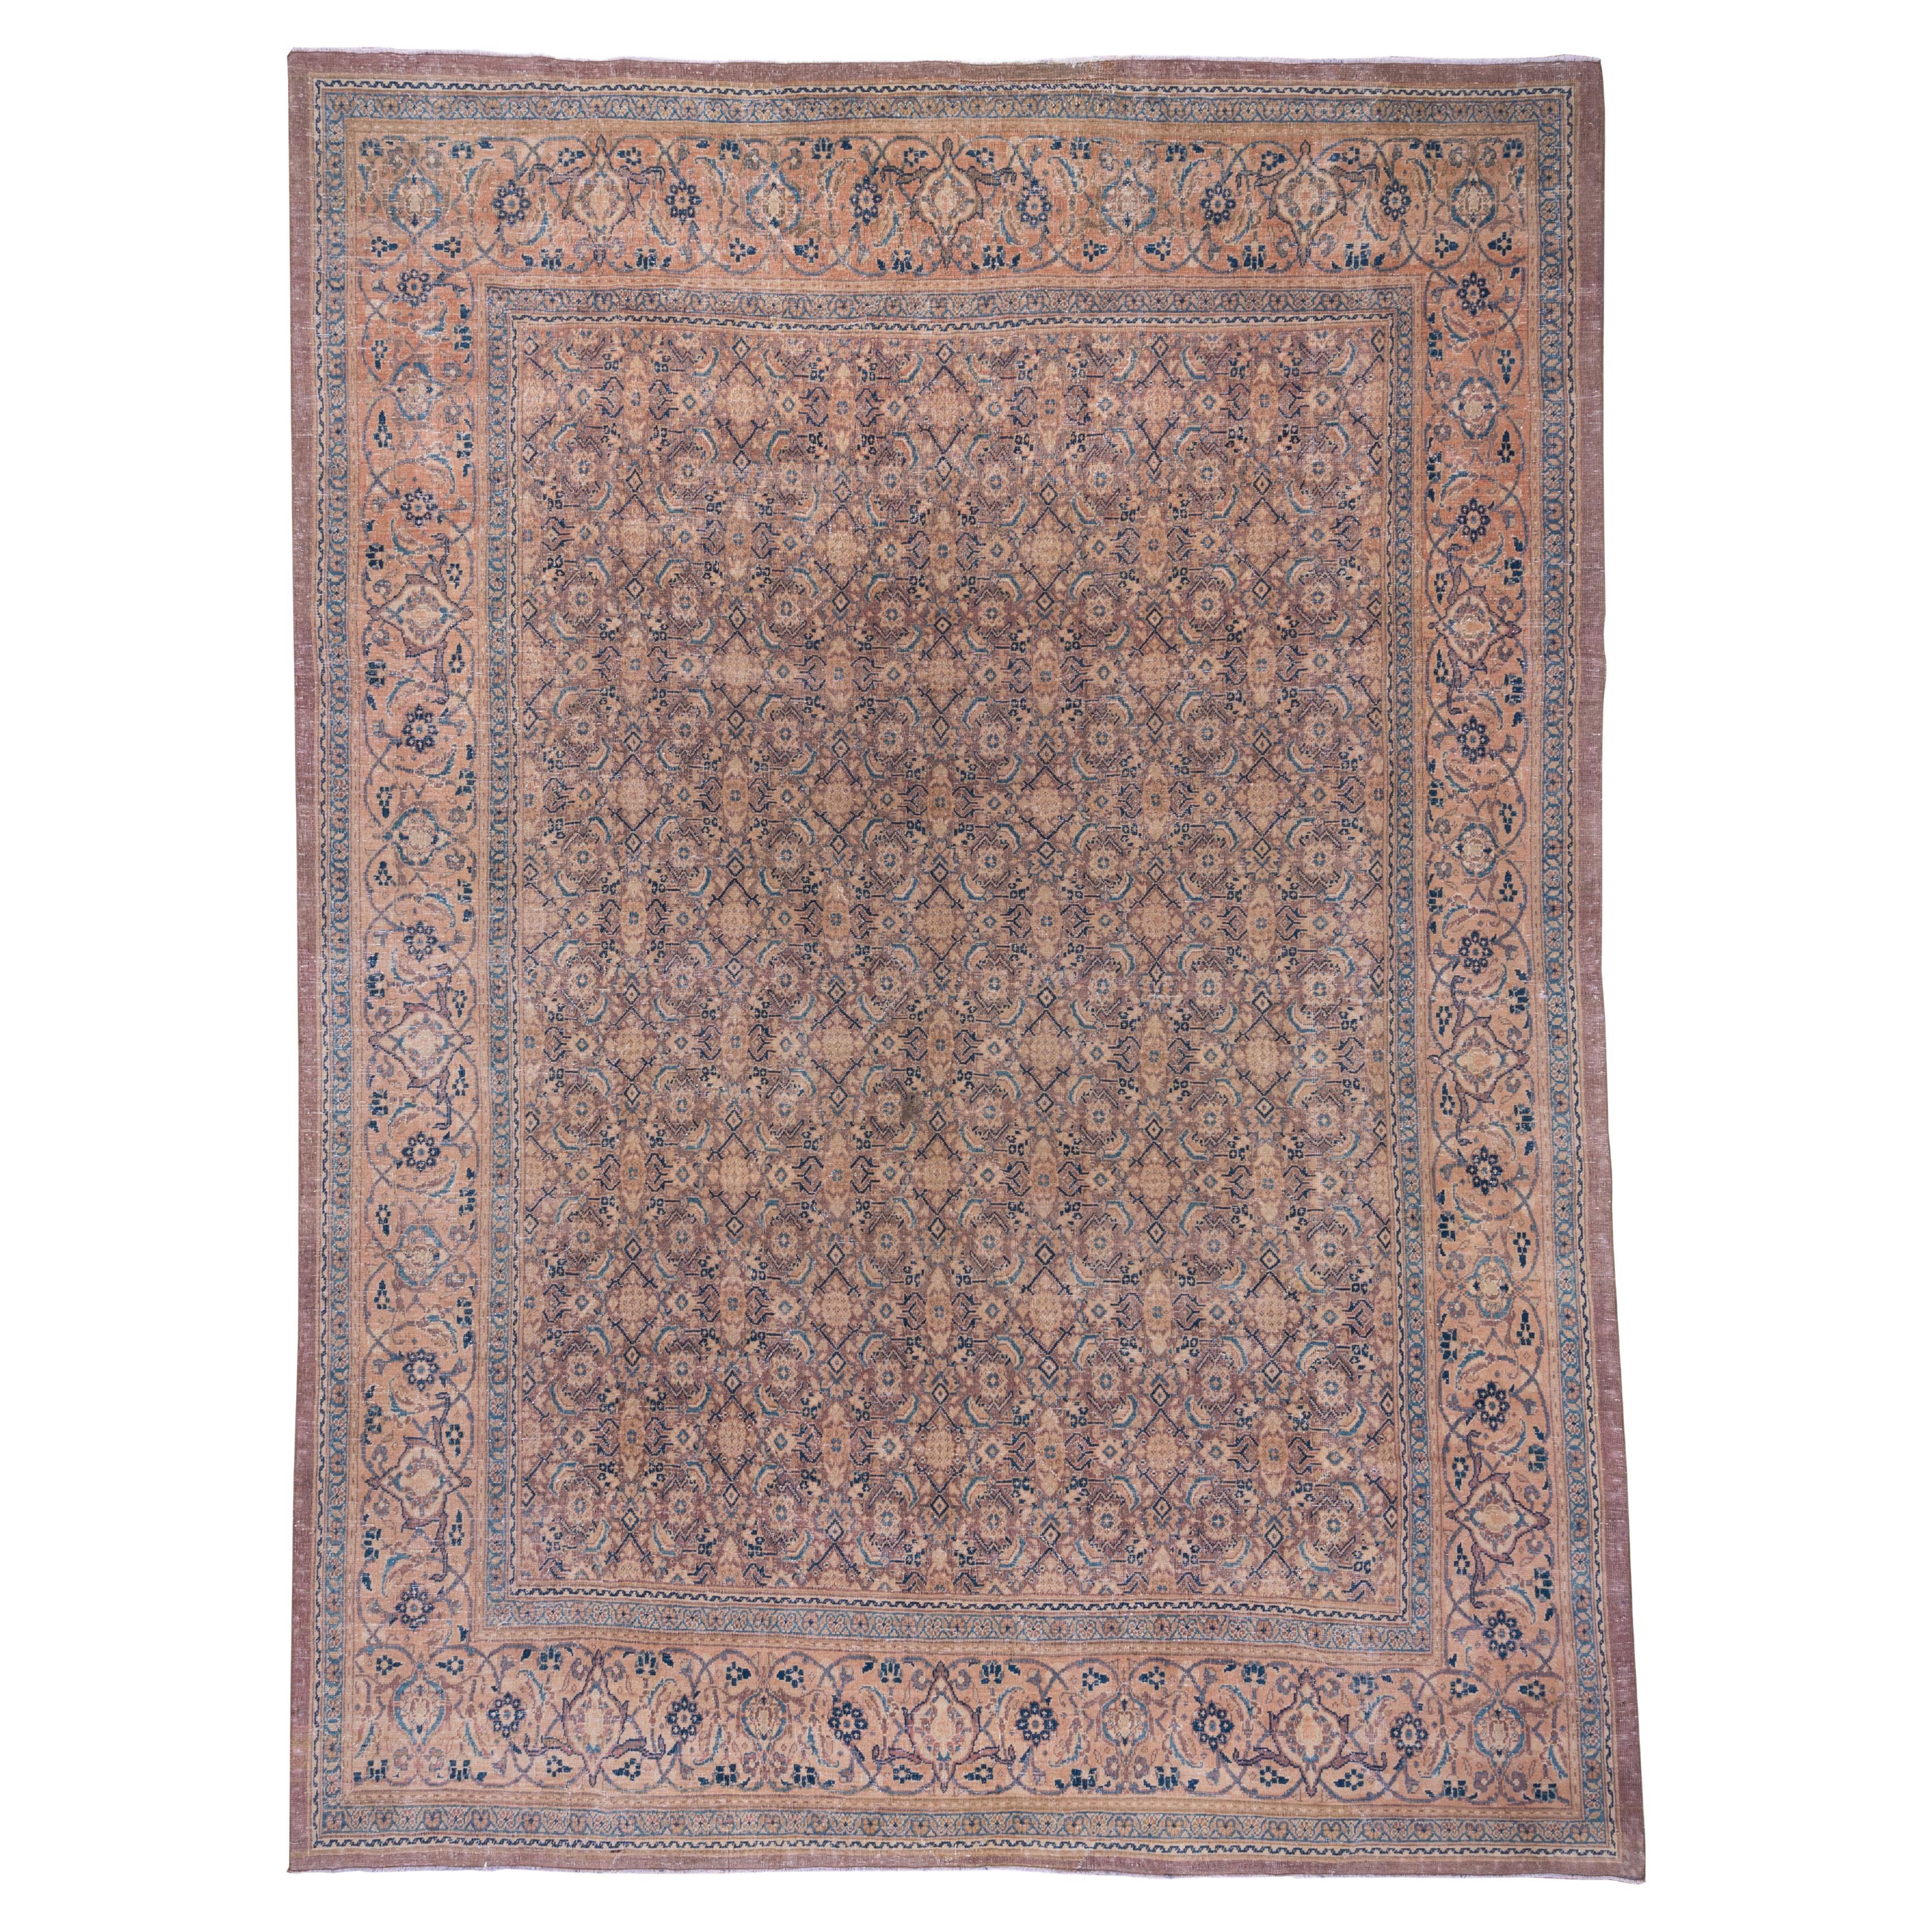 Eliko Rugs by David Ariel Antique Persian Mahal Rug, Purple Allover Field For Sale